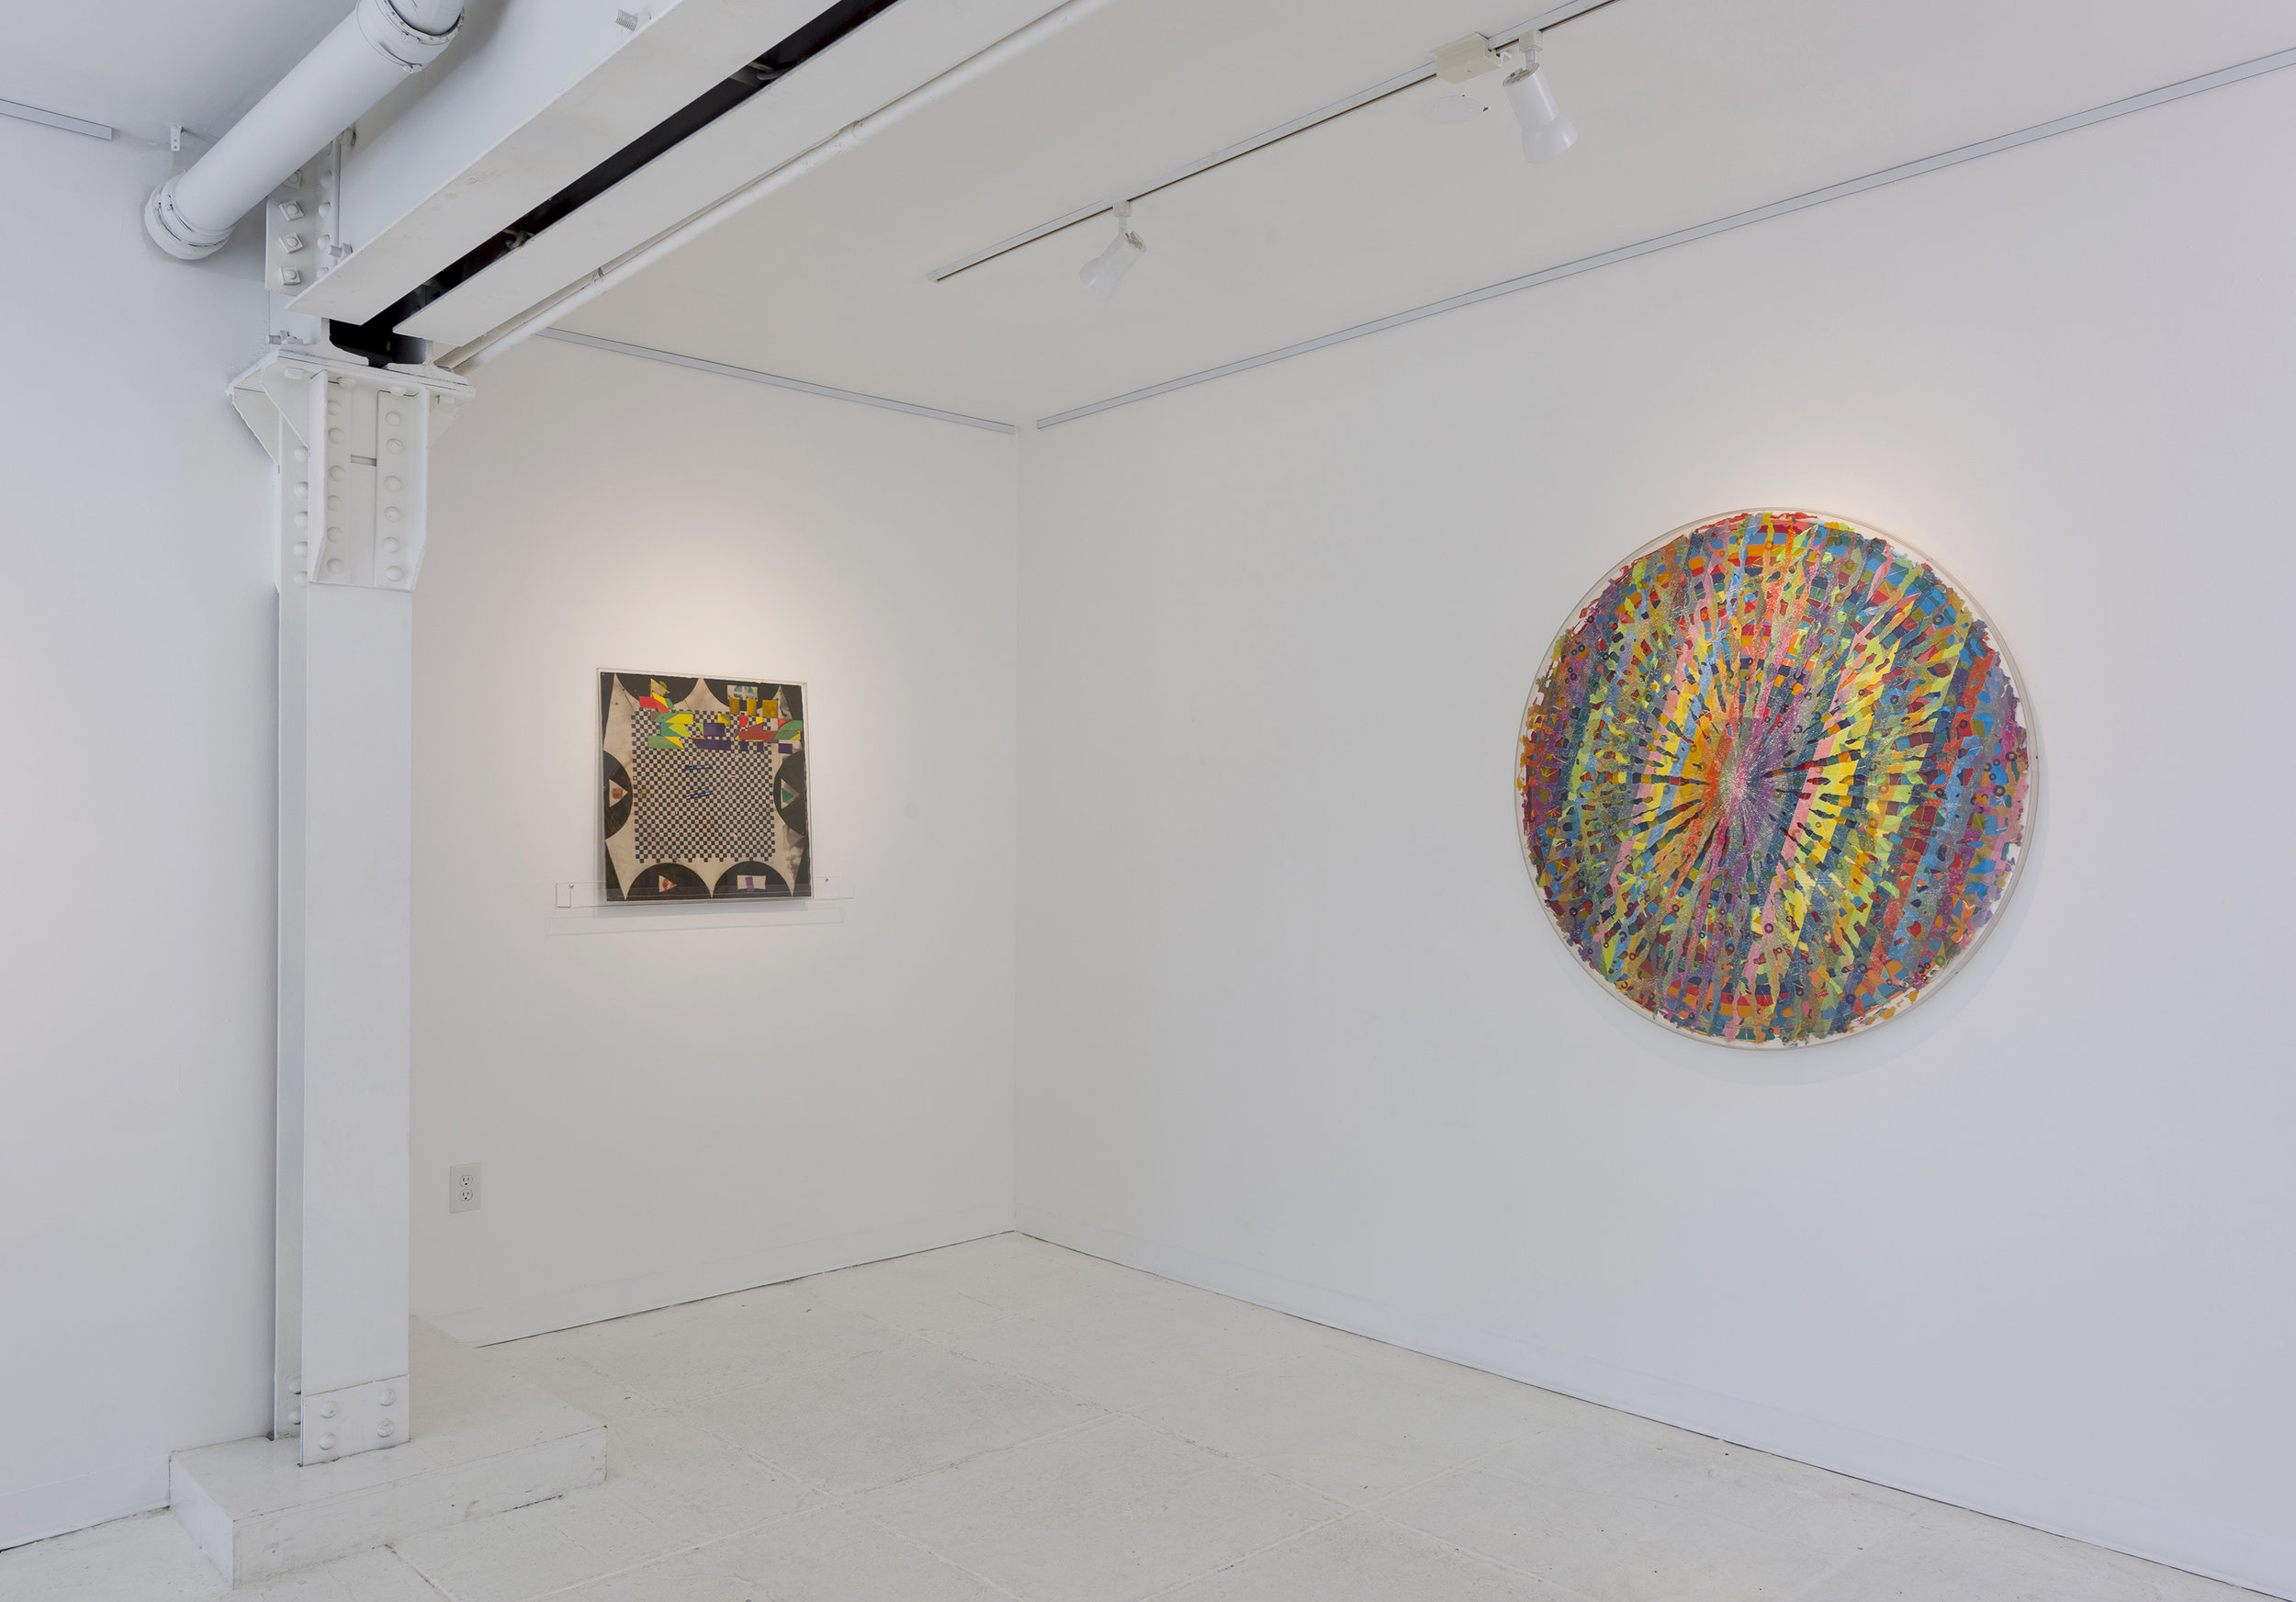  Installation view of  Rupture of Plane: Alan Shields + Mimbres Painted Pottery   September 9 - October 7, 2018  Photo by Ruben Diaz   Link to Exhibition Text  